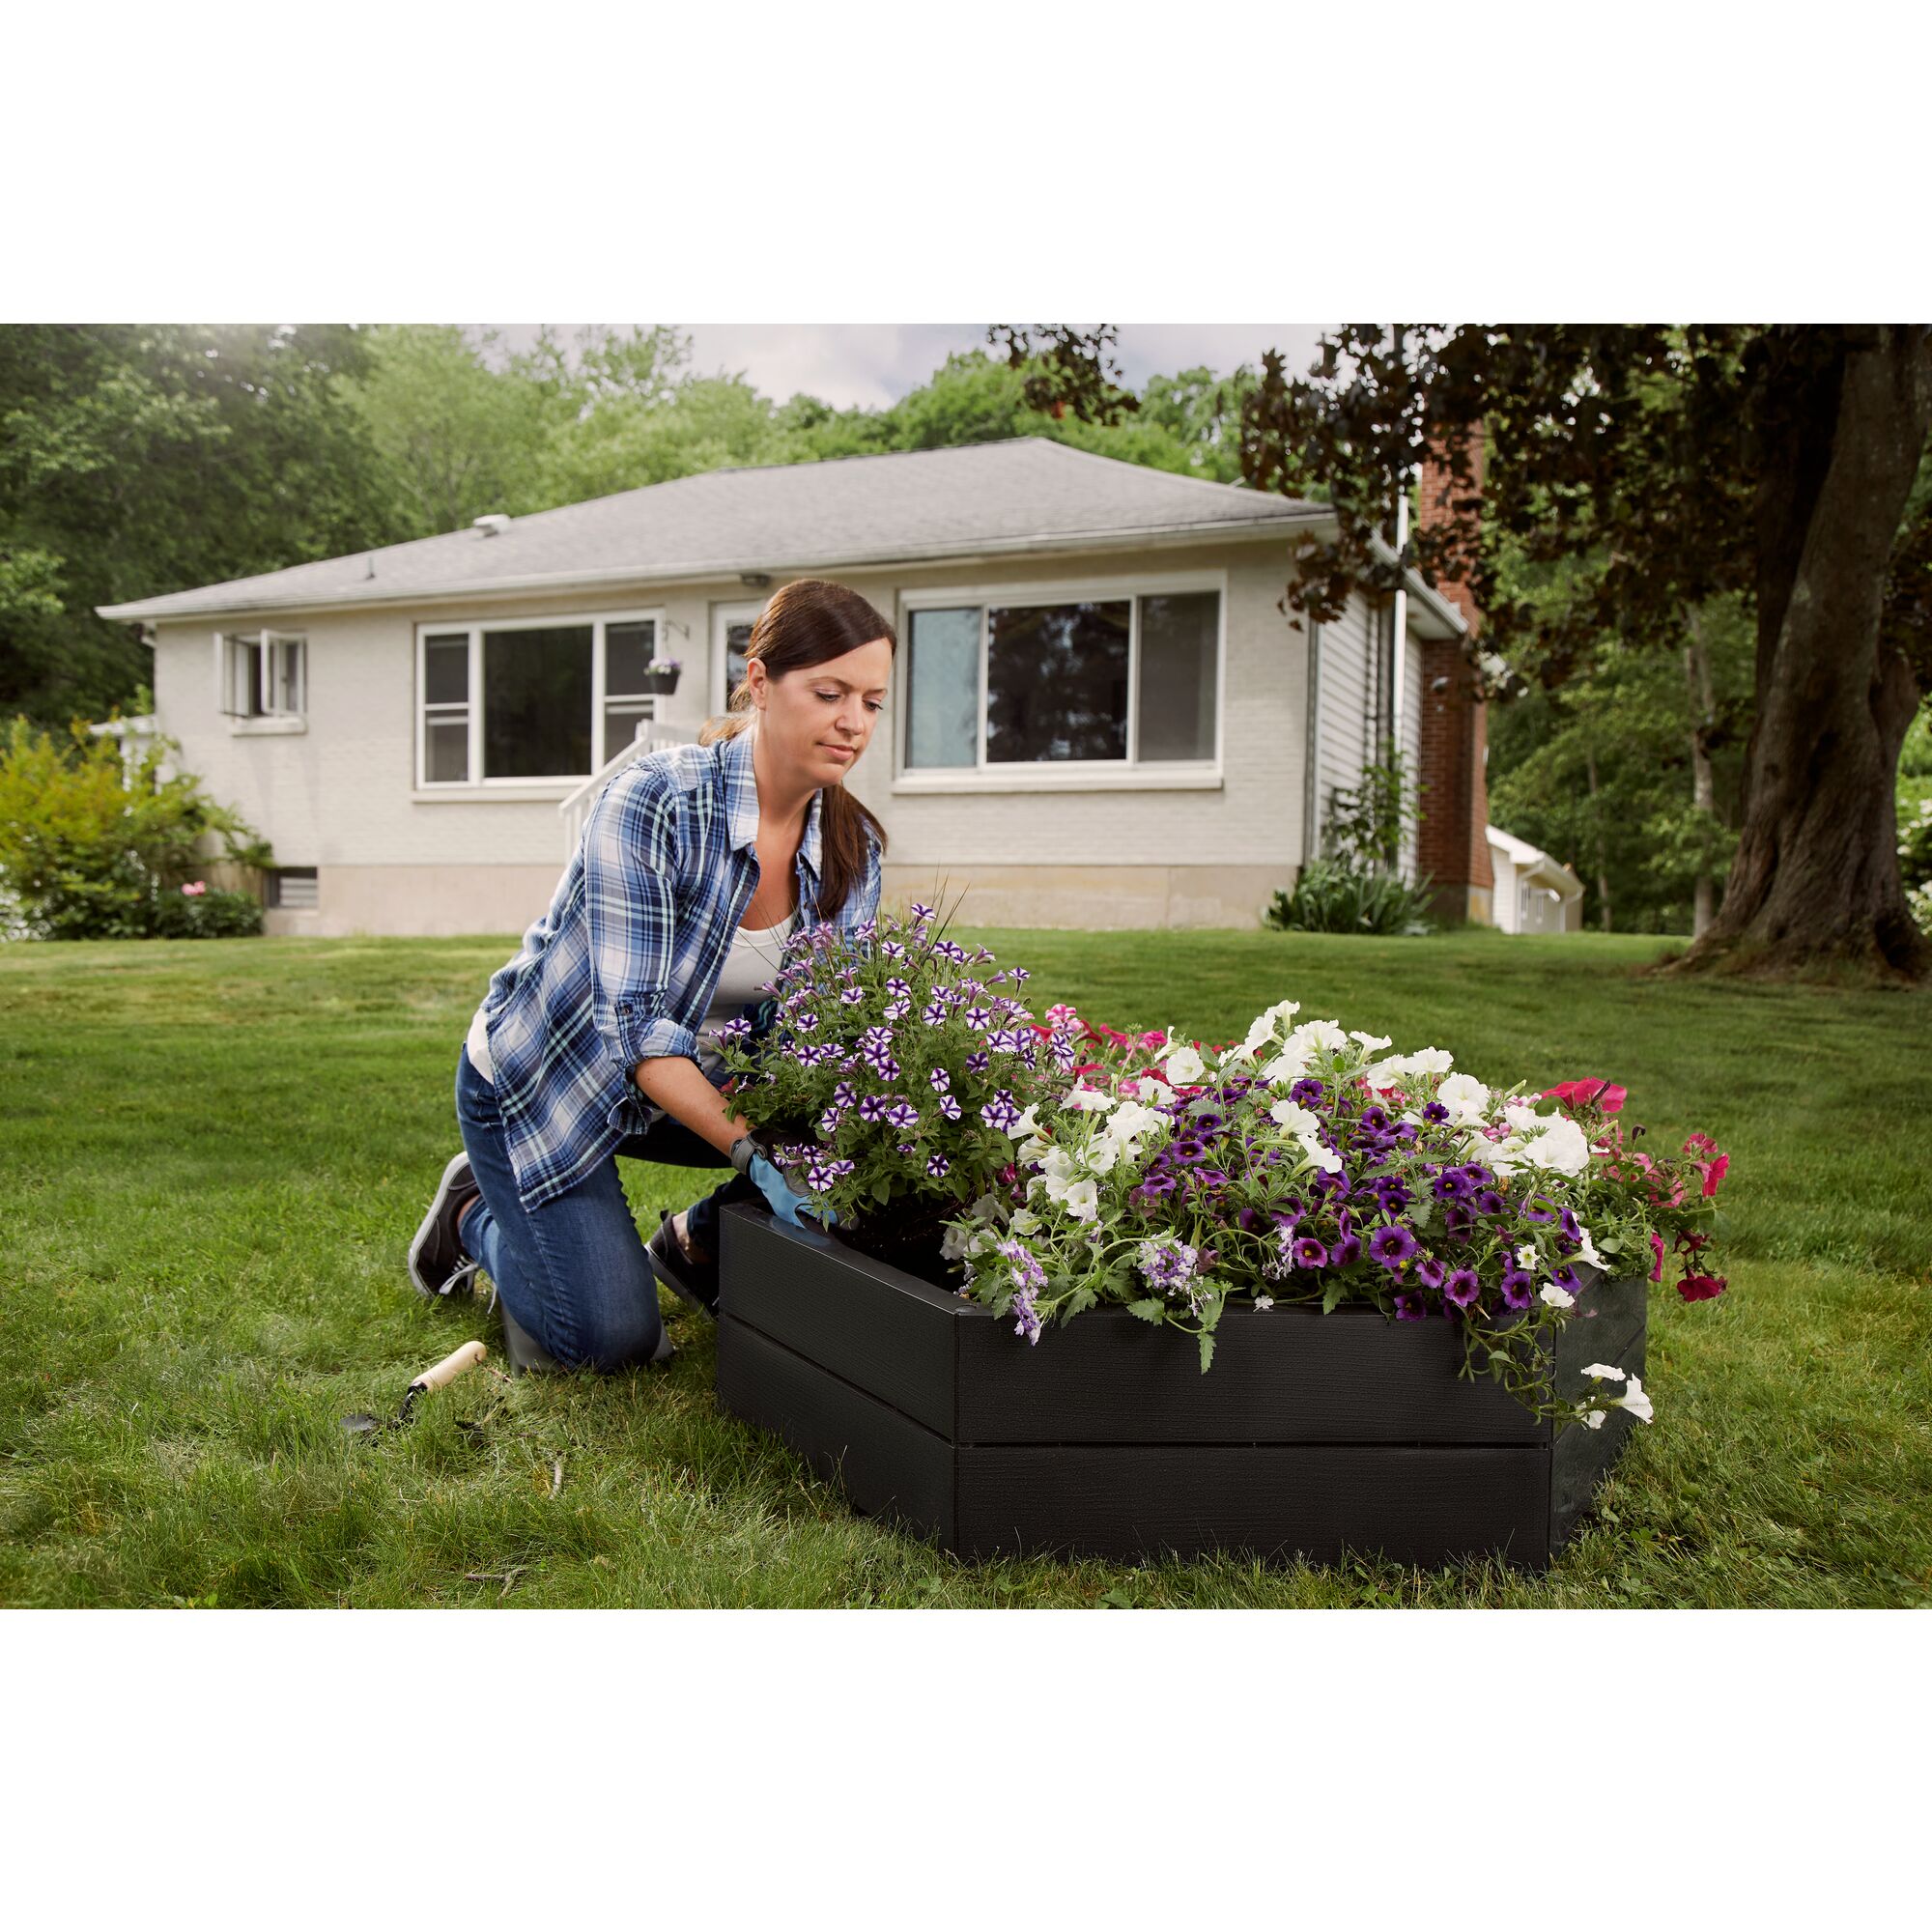 Black and Decker raised garden bed being set up by a person in a yard